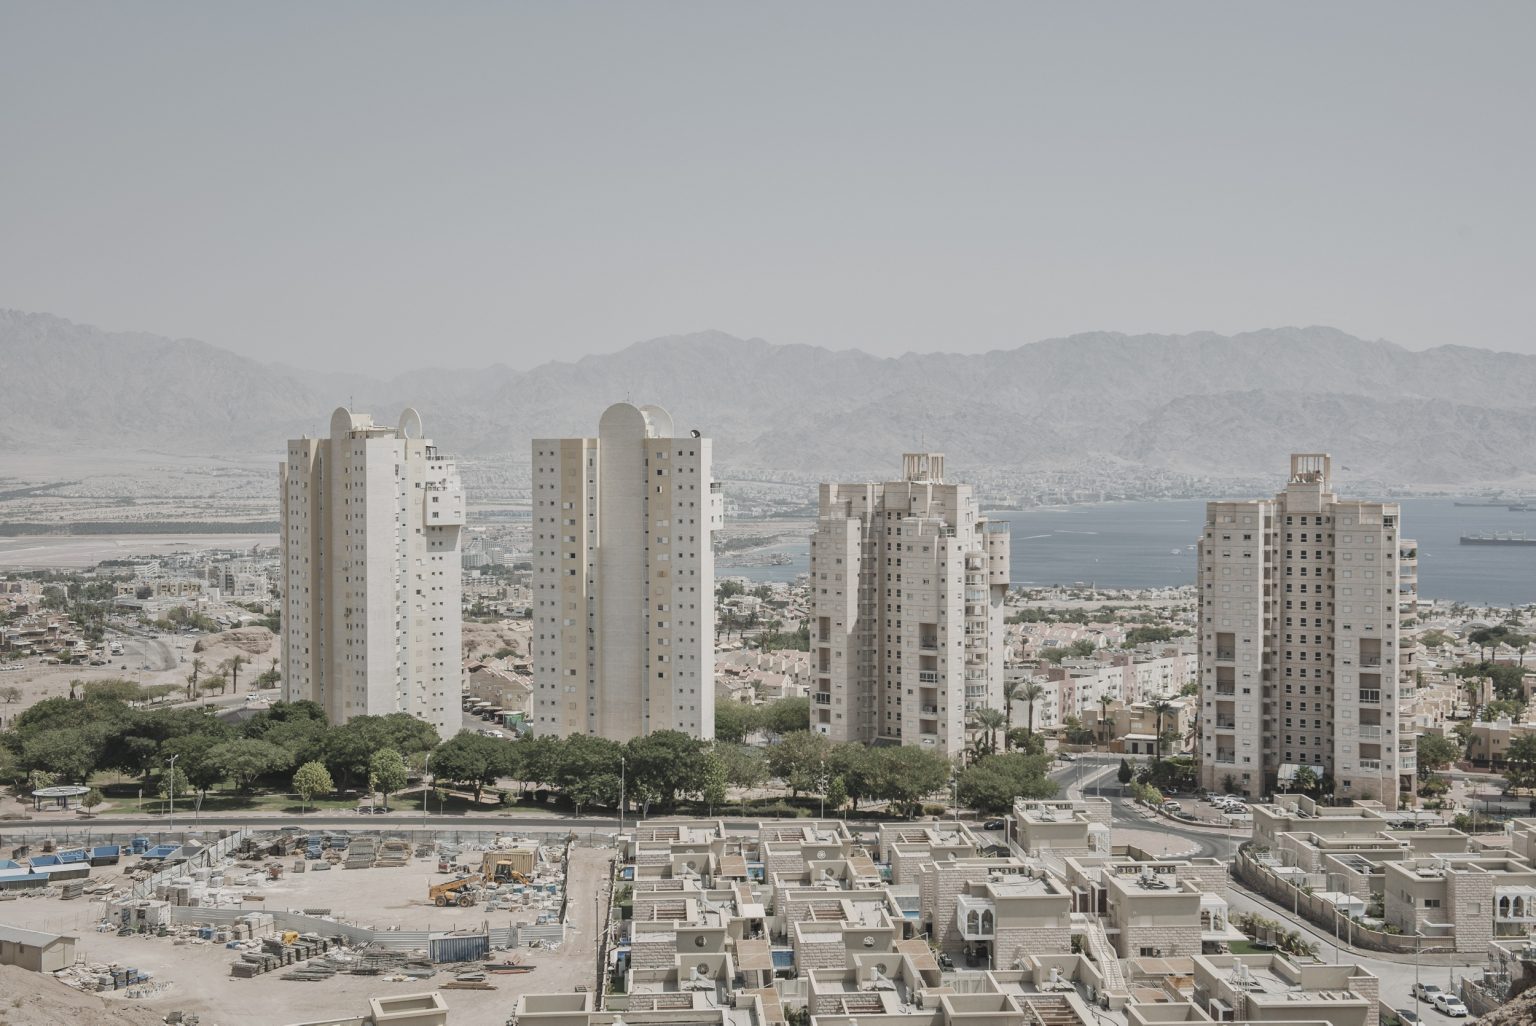 16.15604508 High-rise apartments and hotels in Eilat, Israel, Sept. 3, 2021. Two journalists for The New York Times drove the length of Israel to discover what it means to be Israeli today. They met a kaleidoscope of people, searching for belonging but far apart on how to find it. (Laetitia Vancon/The New York Times)     <span style="color: #ff0000">*** SPECIAL   FEE   APPLIES ***</span> *** Local Caption *** 16.15604508